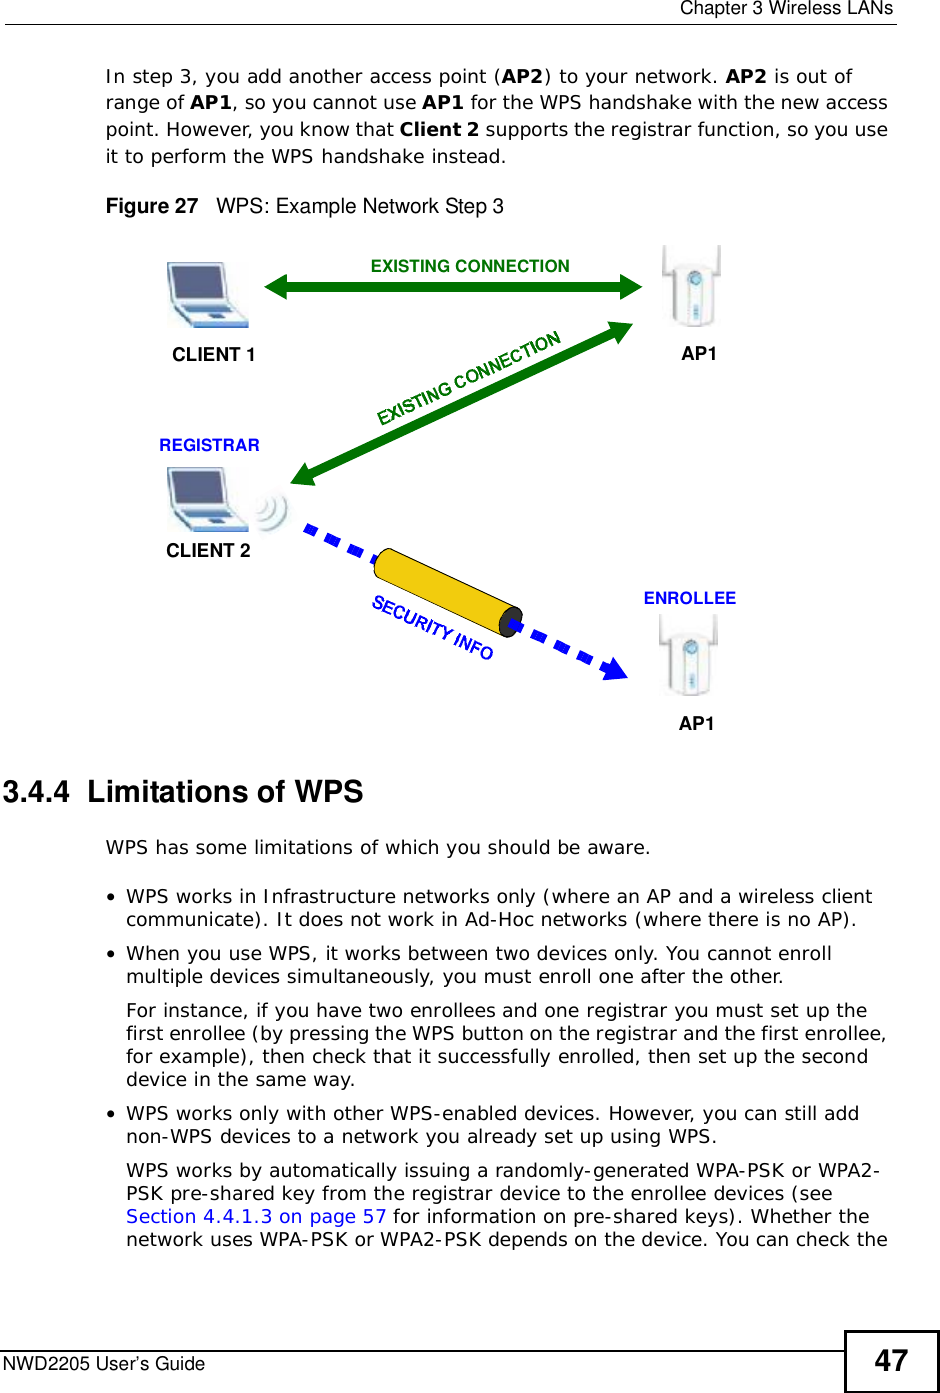  Chapter 3Wireless LANsNWD2205 User’s Guide 47In step 3, you add another access point (AP2) to your network. AP2 is out of range of AP1, so you cannot use AP1 for the WPS handshake with the new access point. However, you know that Client 2 supports the registrar function, so you use it to perform the WPS handshake instead.Figure 27   WPS: Example Network Step 33.4.4  Limitations of WPSWPS has some limitations of which you should be aware. •WPS works in Infrastructure networks only (where an AP and a wireless client communicate). It does not work in Ad-Hoc networks (where there is no AP).•When you use WPS, it works between two devices only. You cannot enroll multiple devices simultaneously, you must enroll one after the other. For instance, if you have two enrollees and one registrar you must set up the first enrollee (by pressing the WPS button on the registrar and the first enrollee, for example), then check that it successfully enrolled, then set up the second device in the same way.•WPS works only with other WPS-enabled devices. However, you can still add non-WPS devices to a network you already set up using WPS. WPS works by automatically issuing a randomly-generated WPA-PSK or WPA2-PSK pre-shared key from the registrar device to the enrollee devices (see Section 4.4.1.3 on page 57 for information on pre-shared keys). Whether the network uses WPA-PSK or WPA2-PSK depends on the device. You can check the CLIENT 1 AP1REGISTRARCLIENT 2EXISTING CONNECTIONENROLLEEAP1